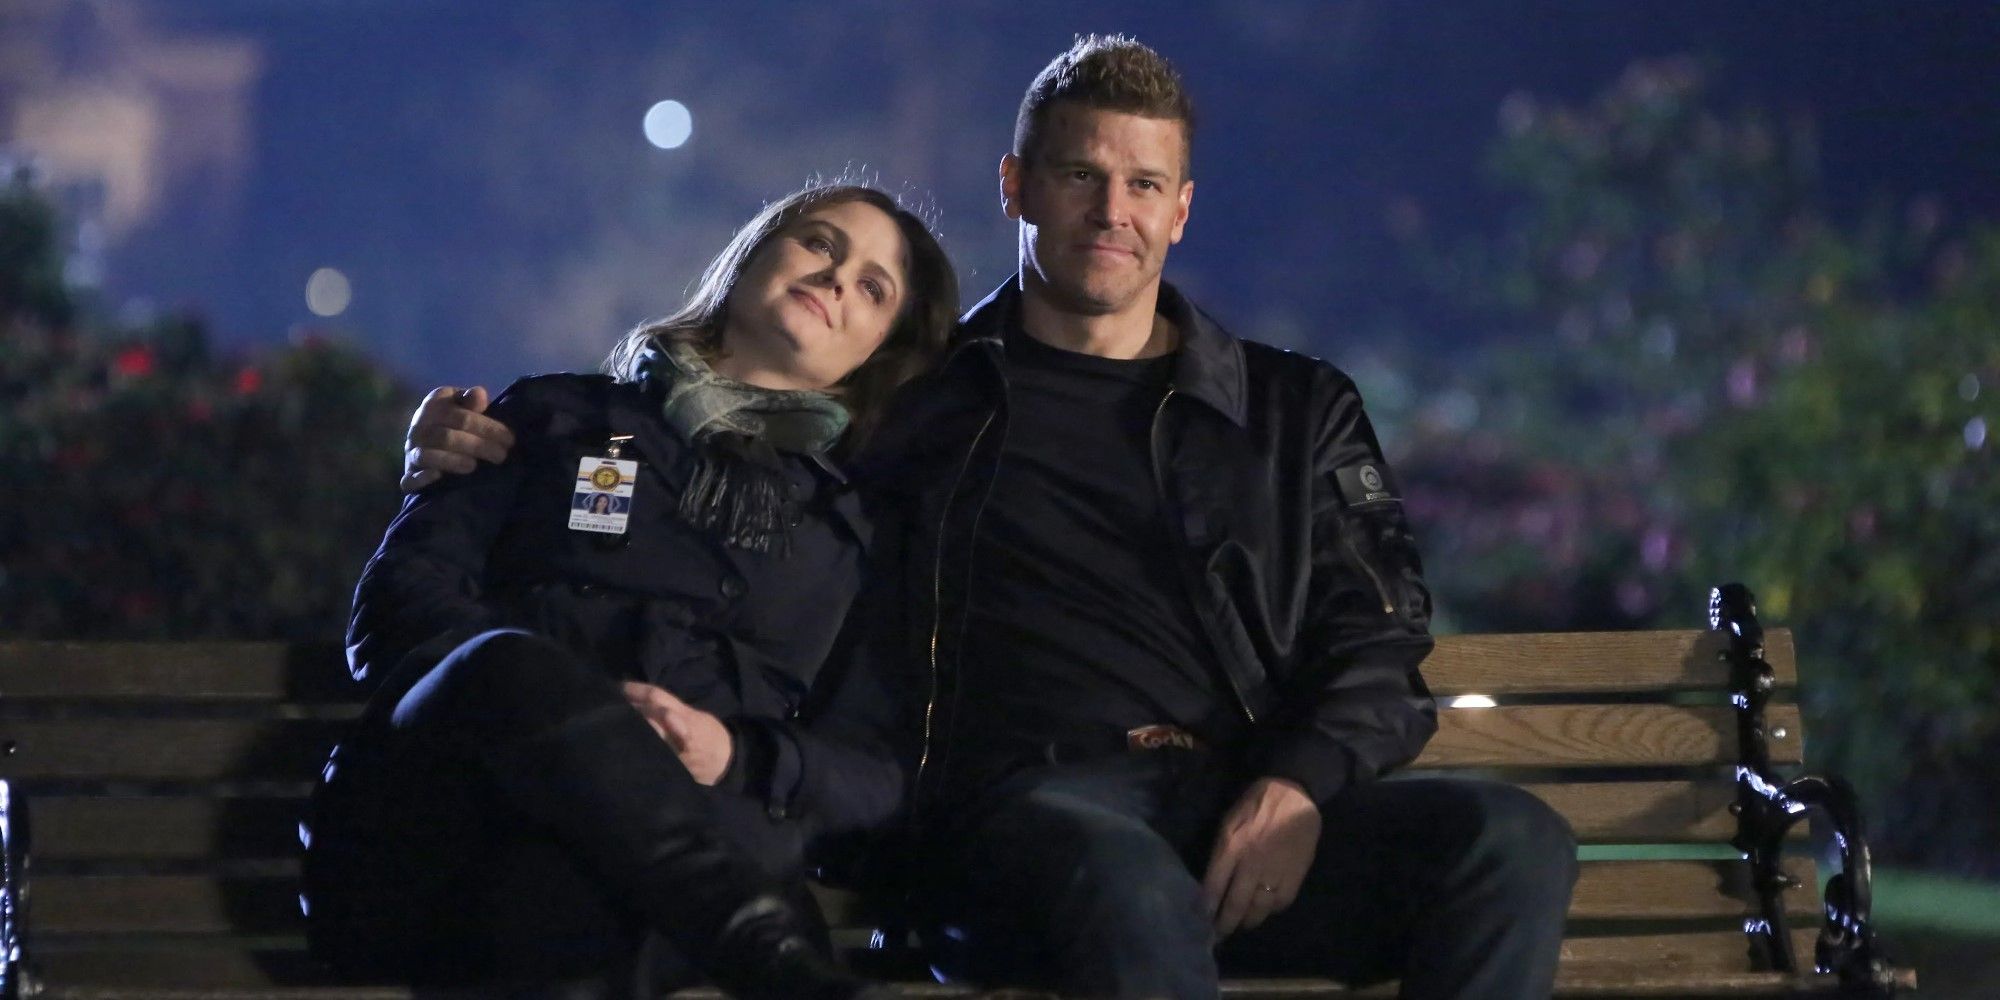 Brennan and Booth sitting on a bench in Bones Season 12